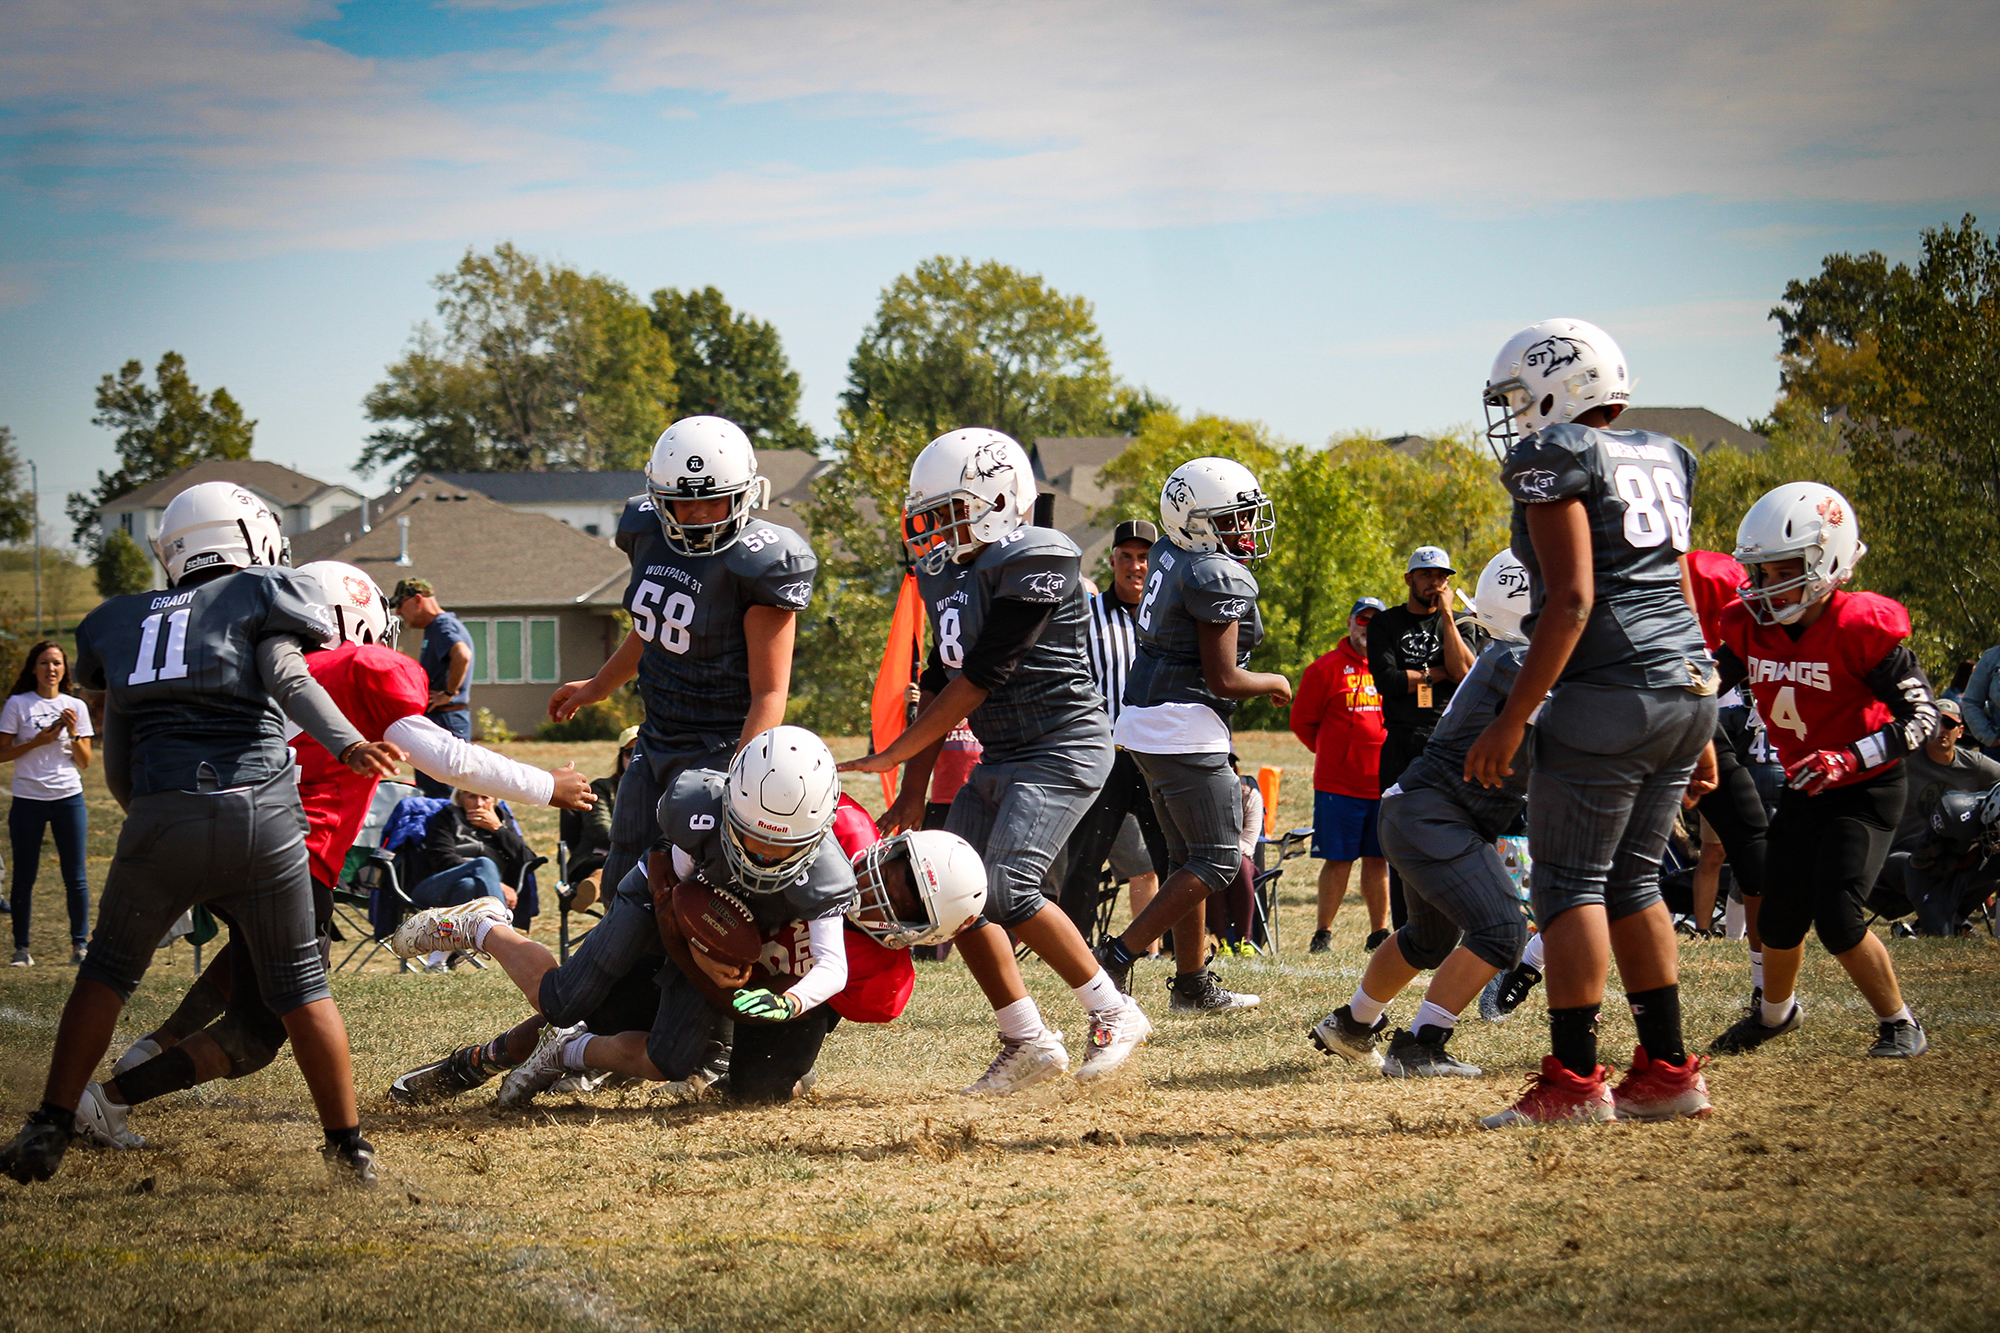 Competitive Youth Tackle Football